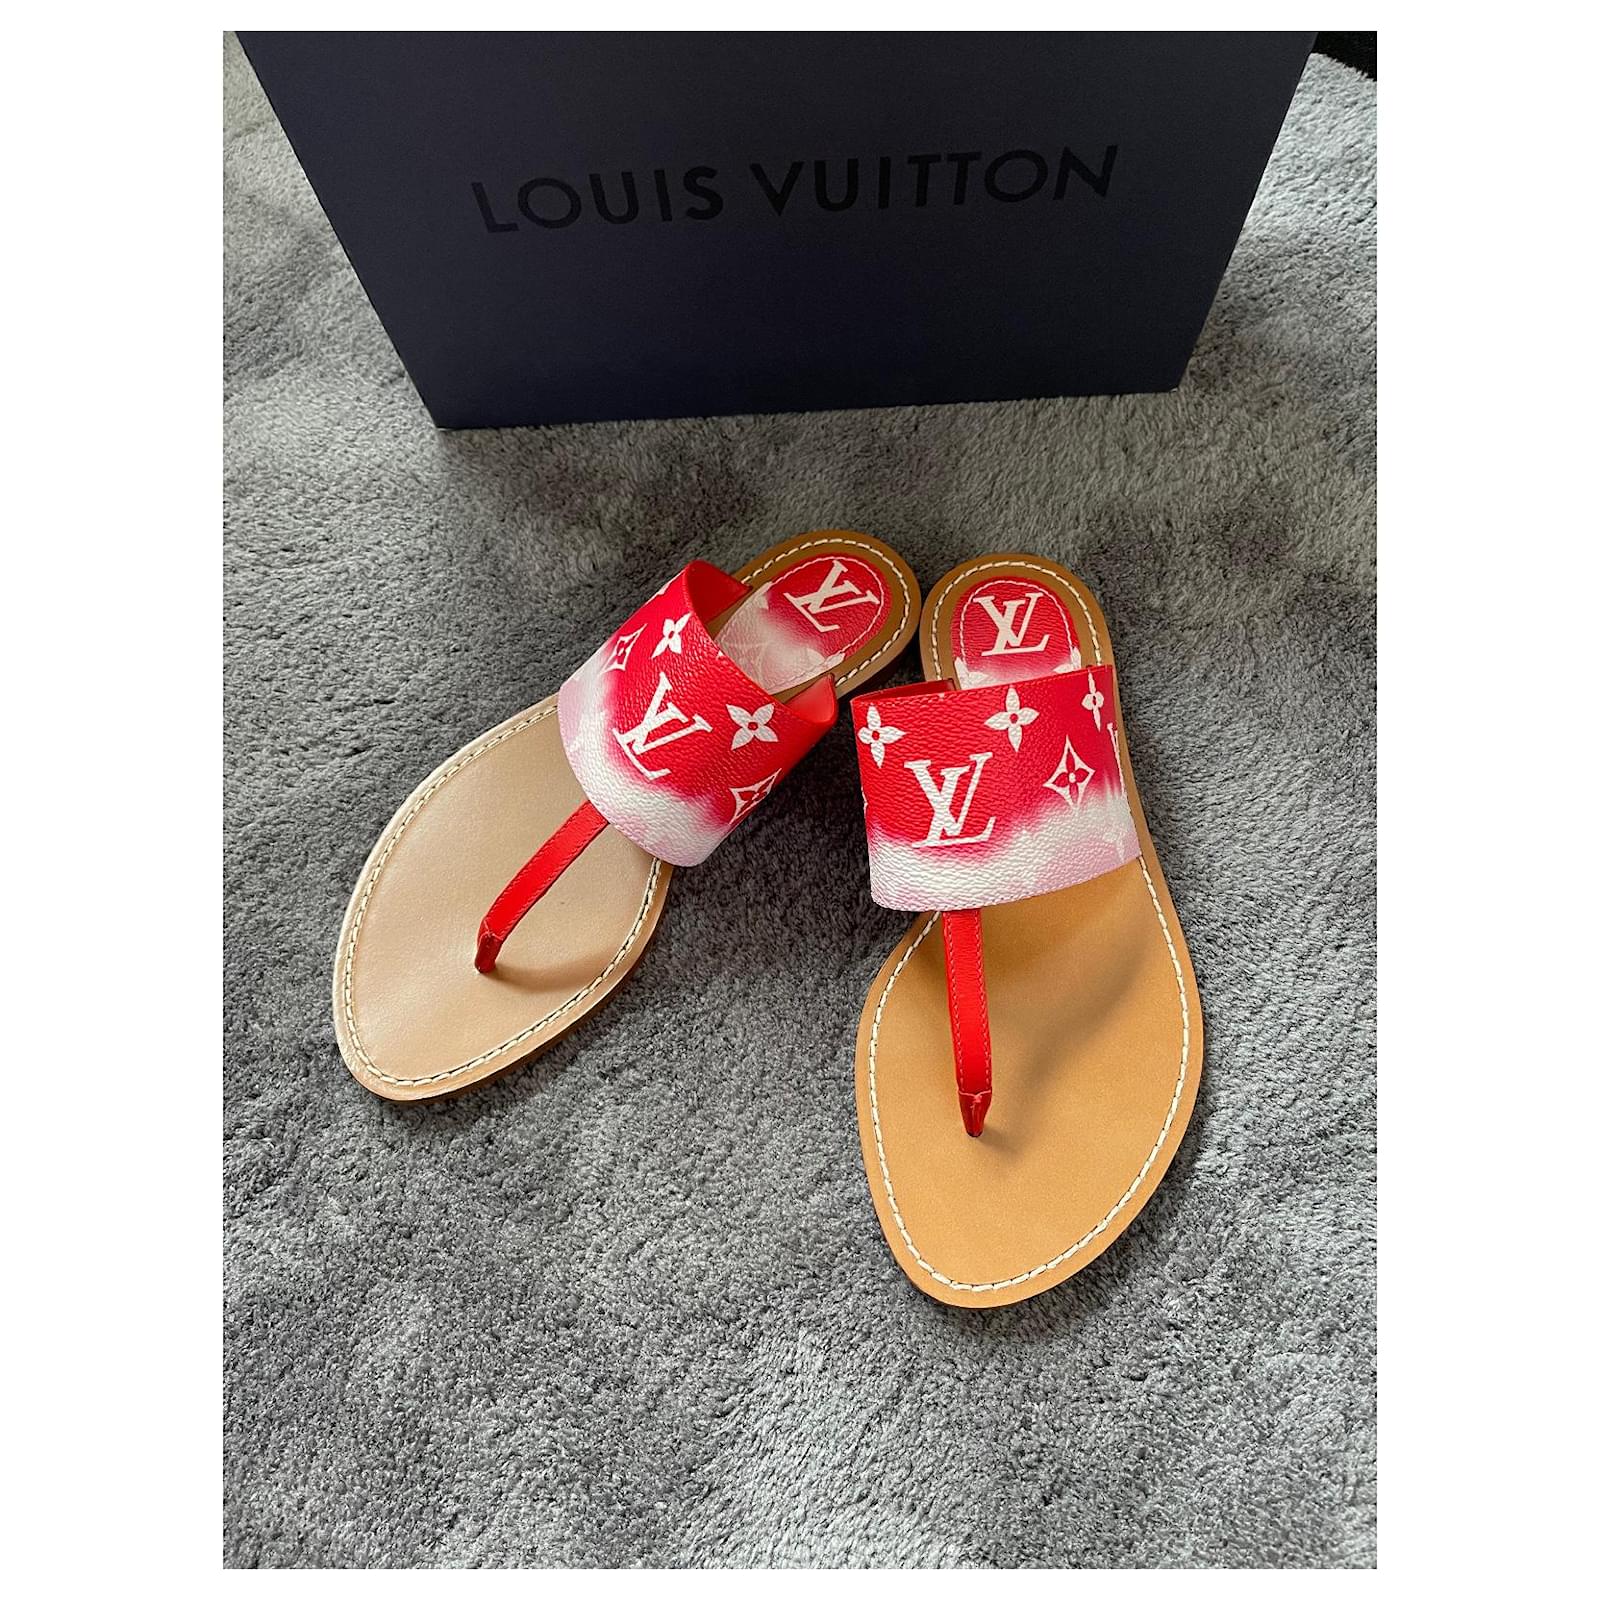 Leather flip flops Louis Vuitton Red size 37.5 EU in Leather